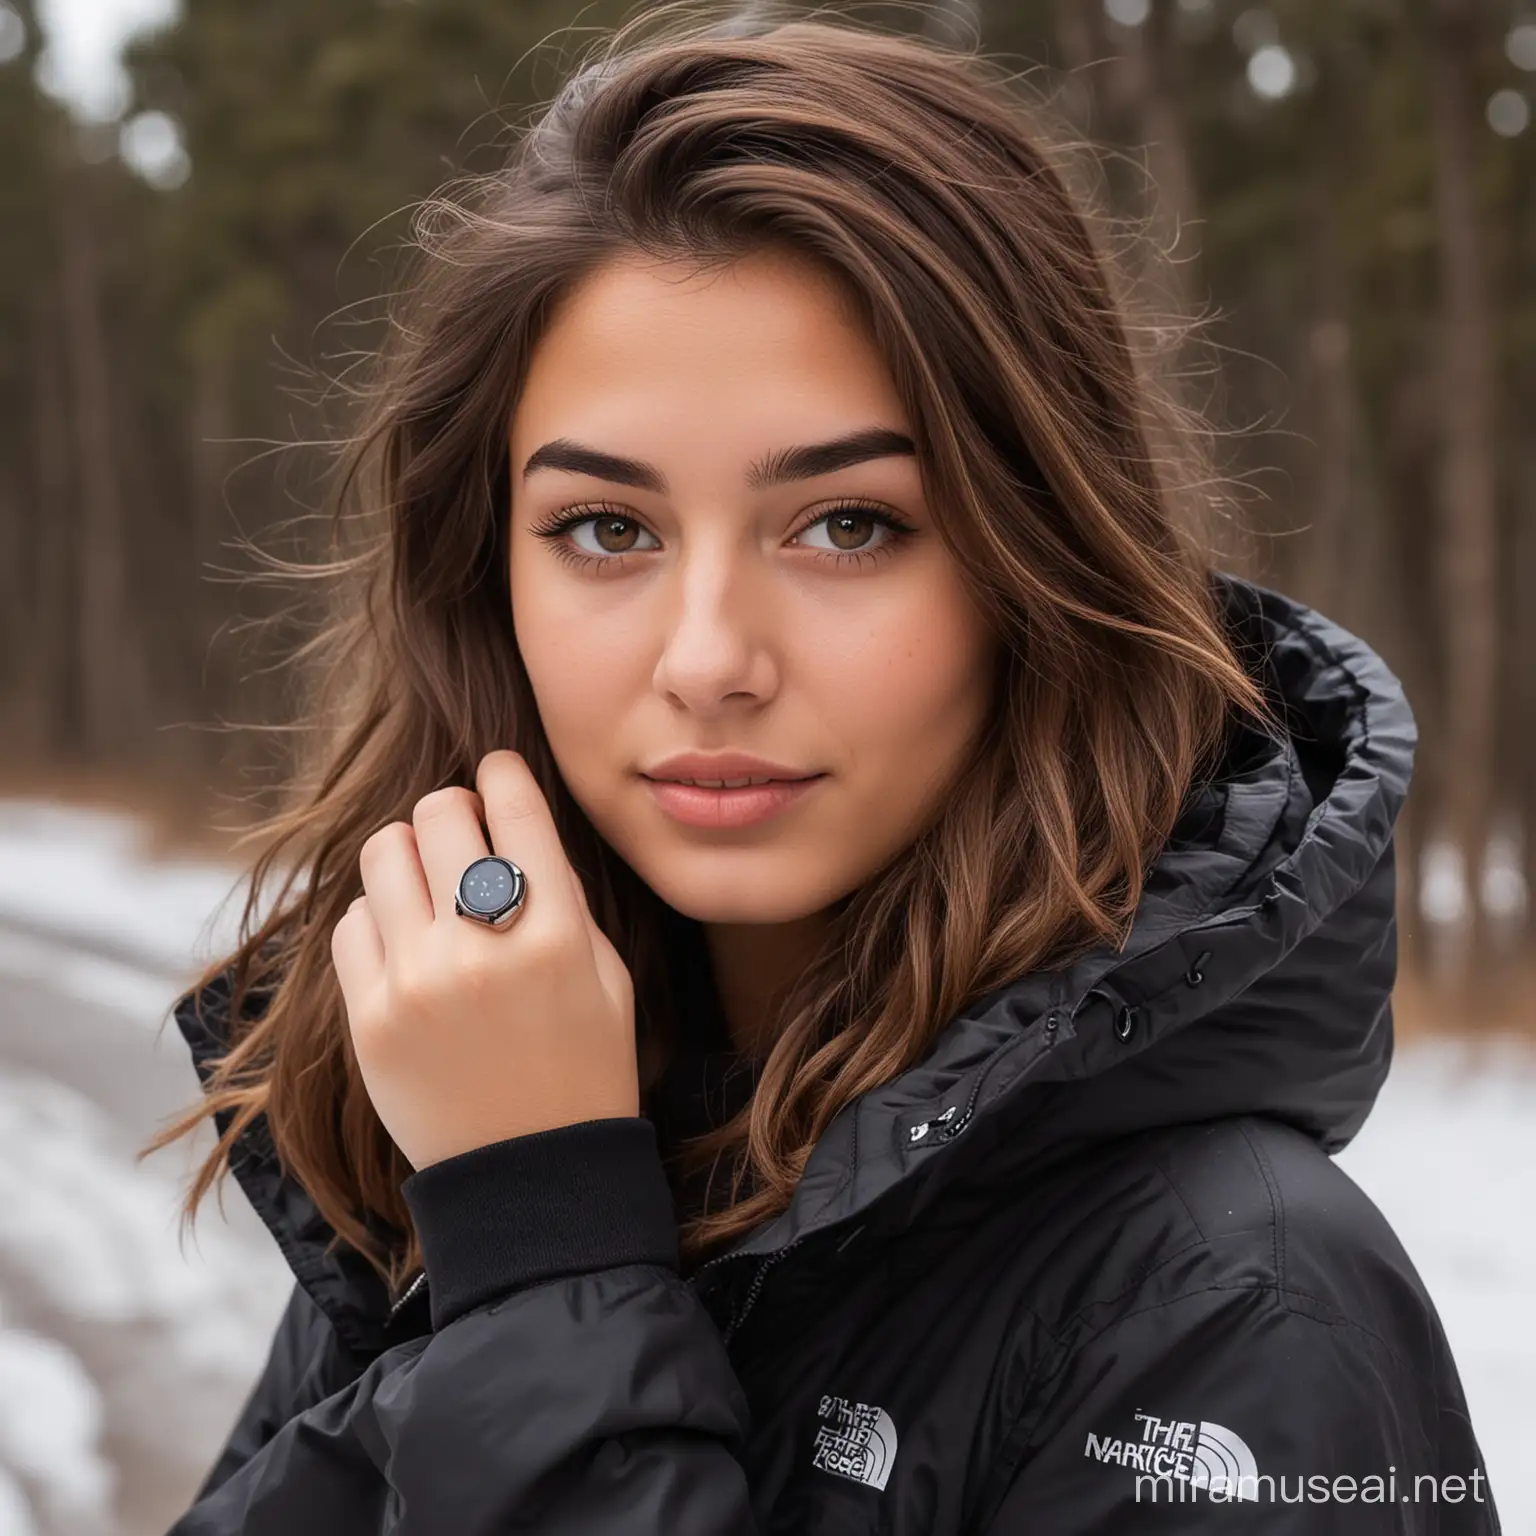 Beautiful 21 year old woman with brown hair and brown eyes wearing a black The North Face parka and an Apple Watch